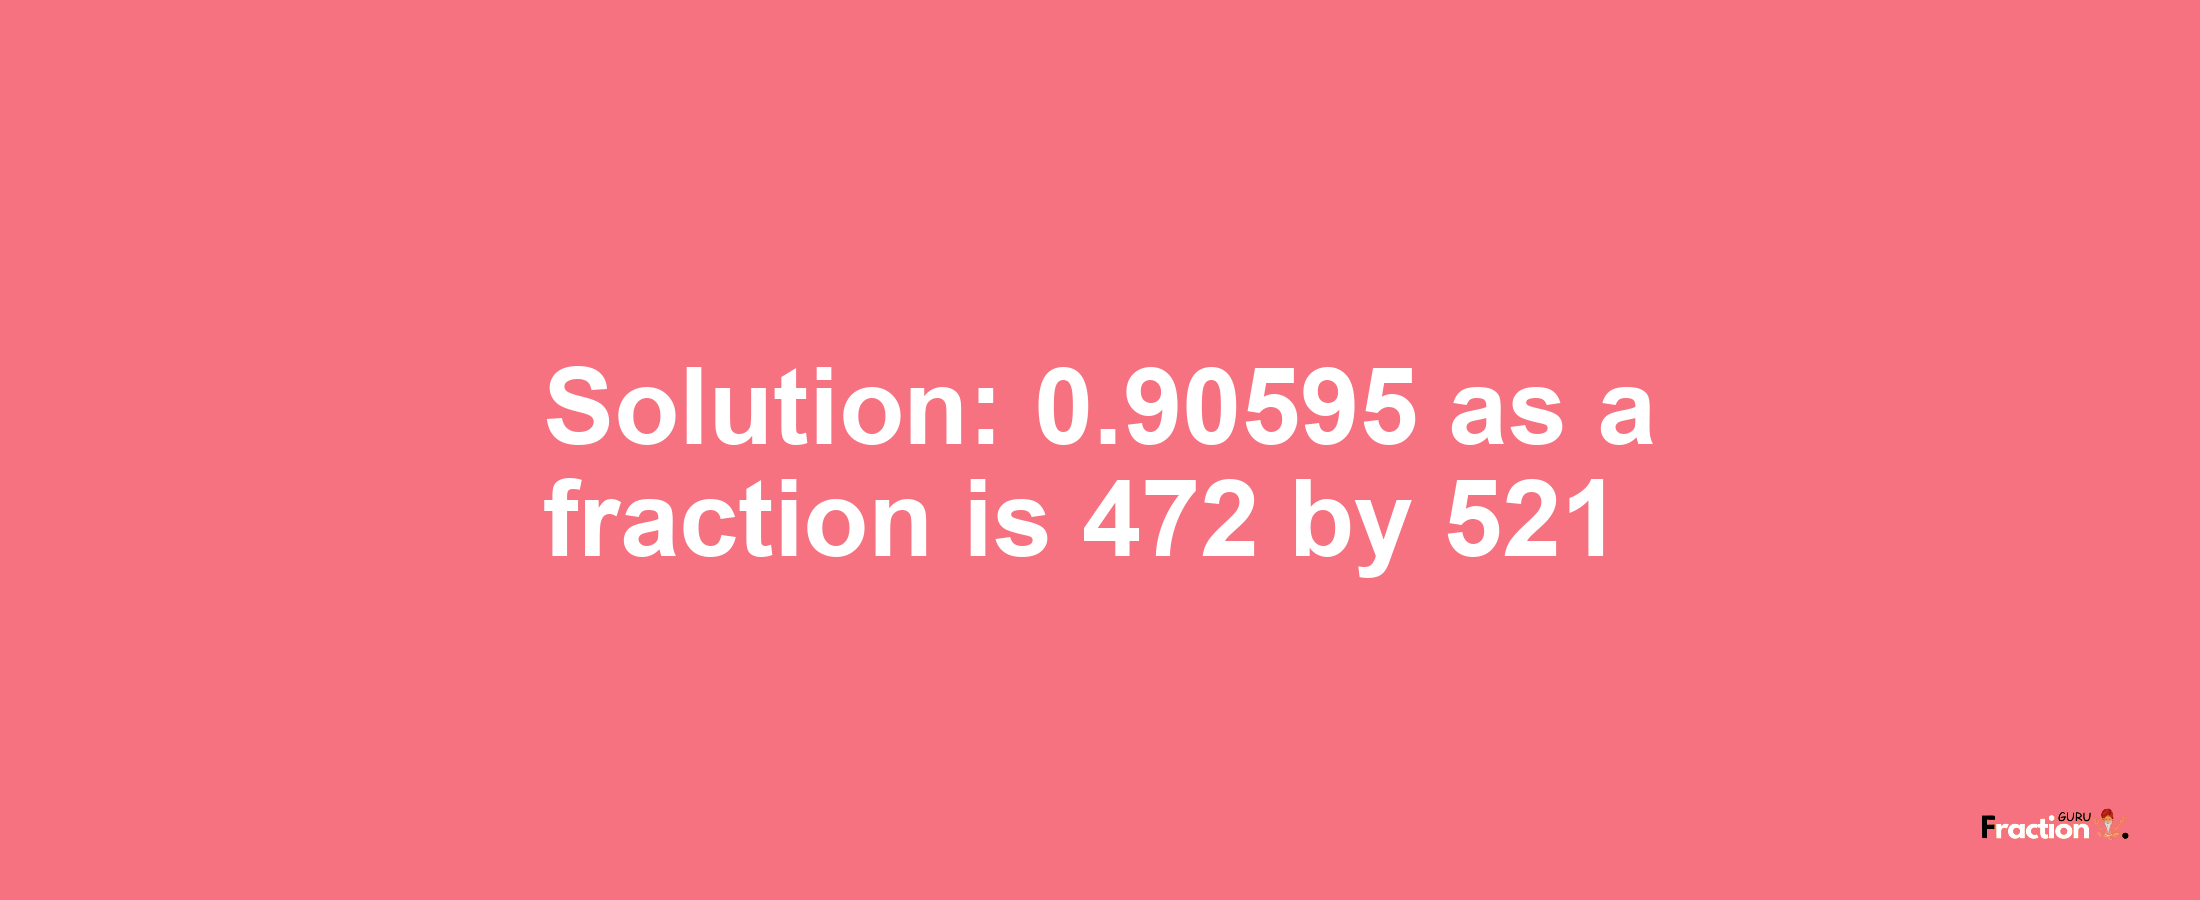 Solution:0.90595 as a fraction is 472/521